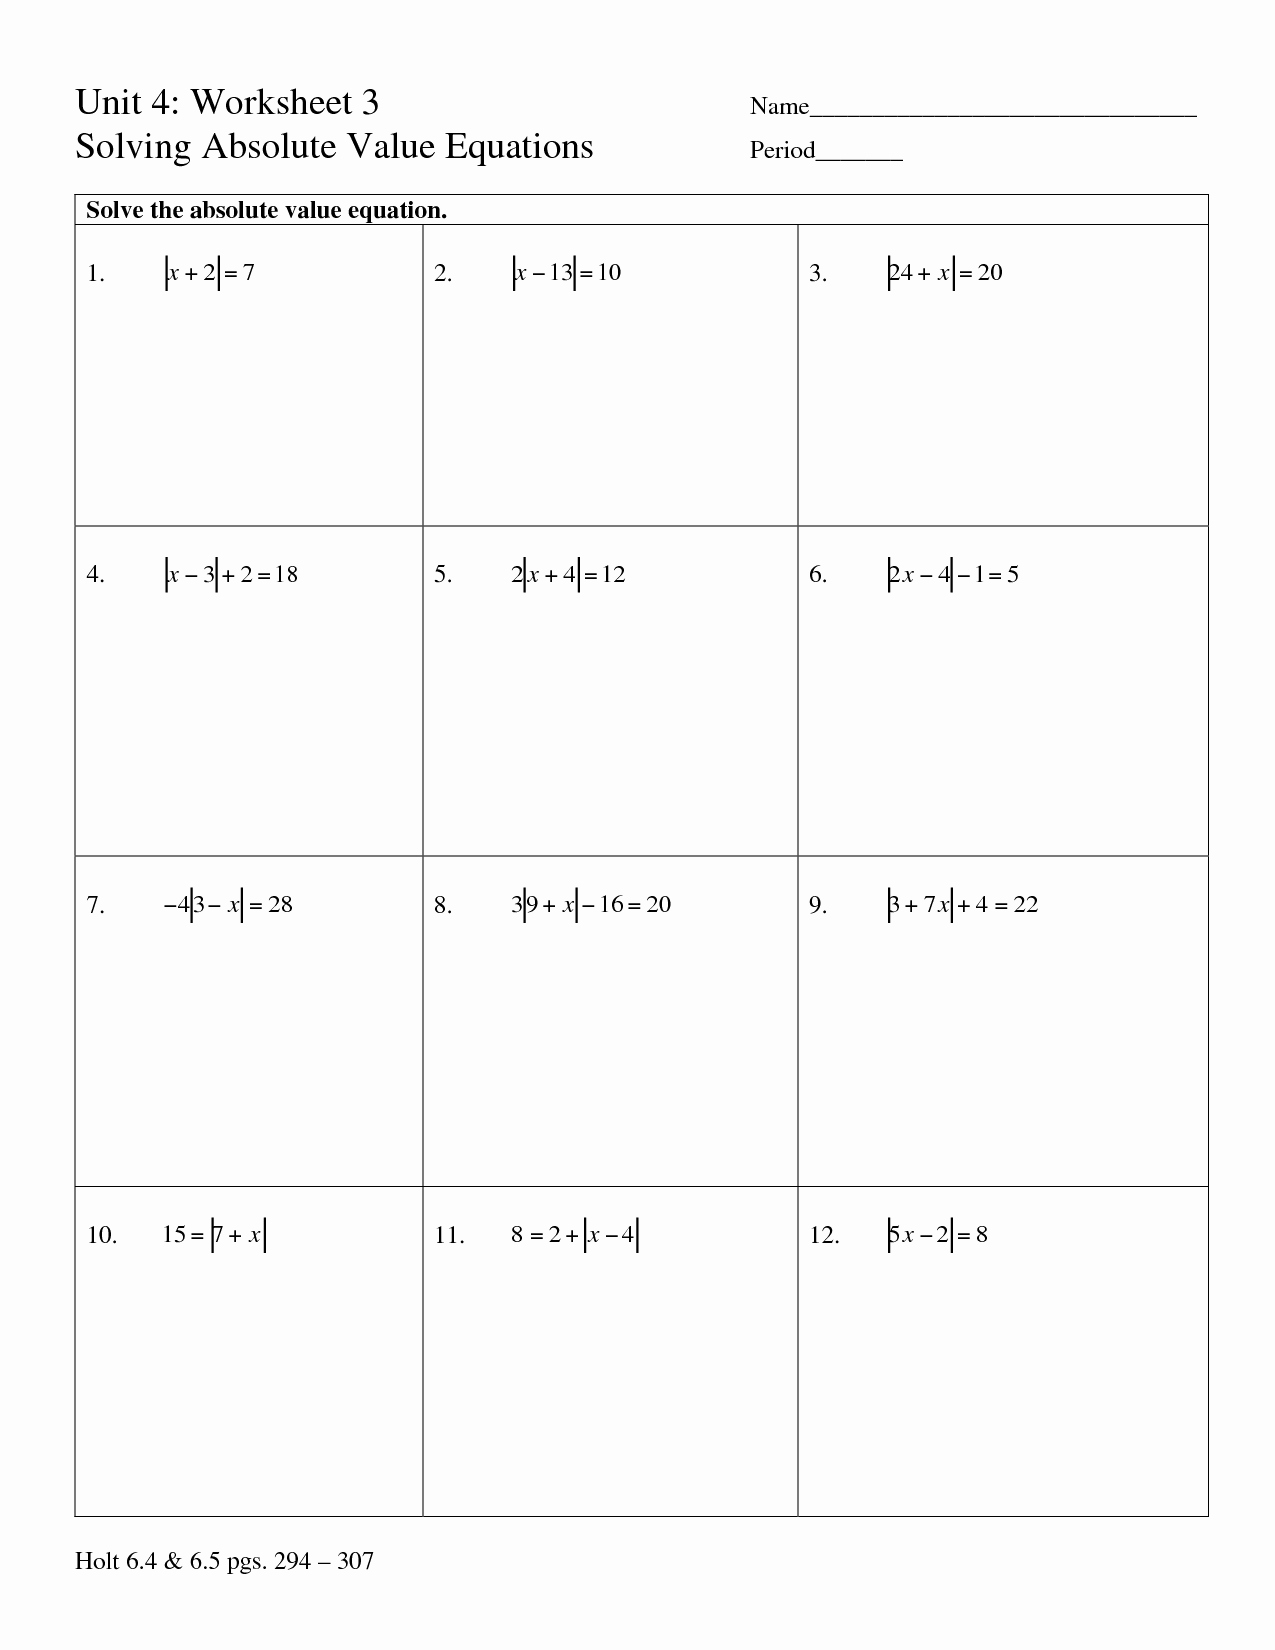 Solving Absolute Value Equations Worksheet Beautiful Worksheet solving Absolute Value Equations and